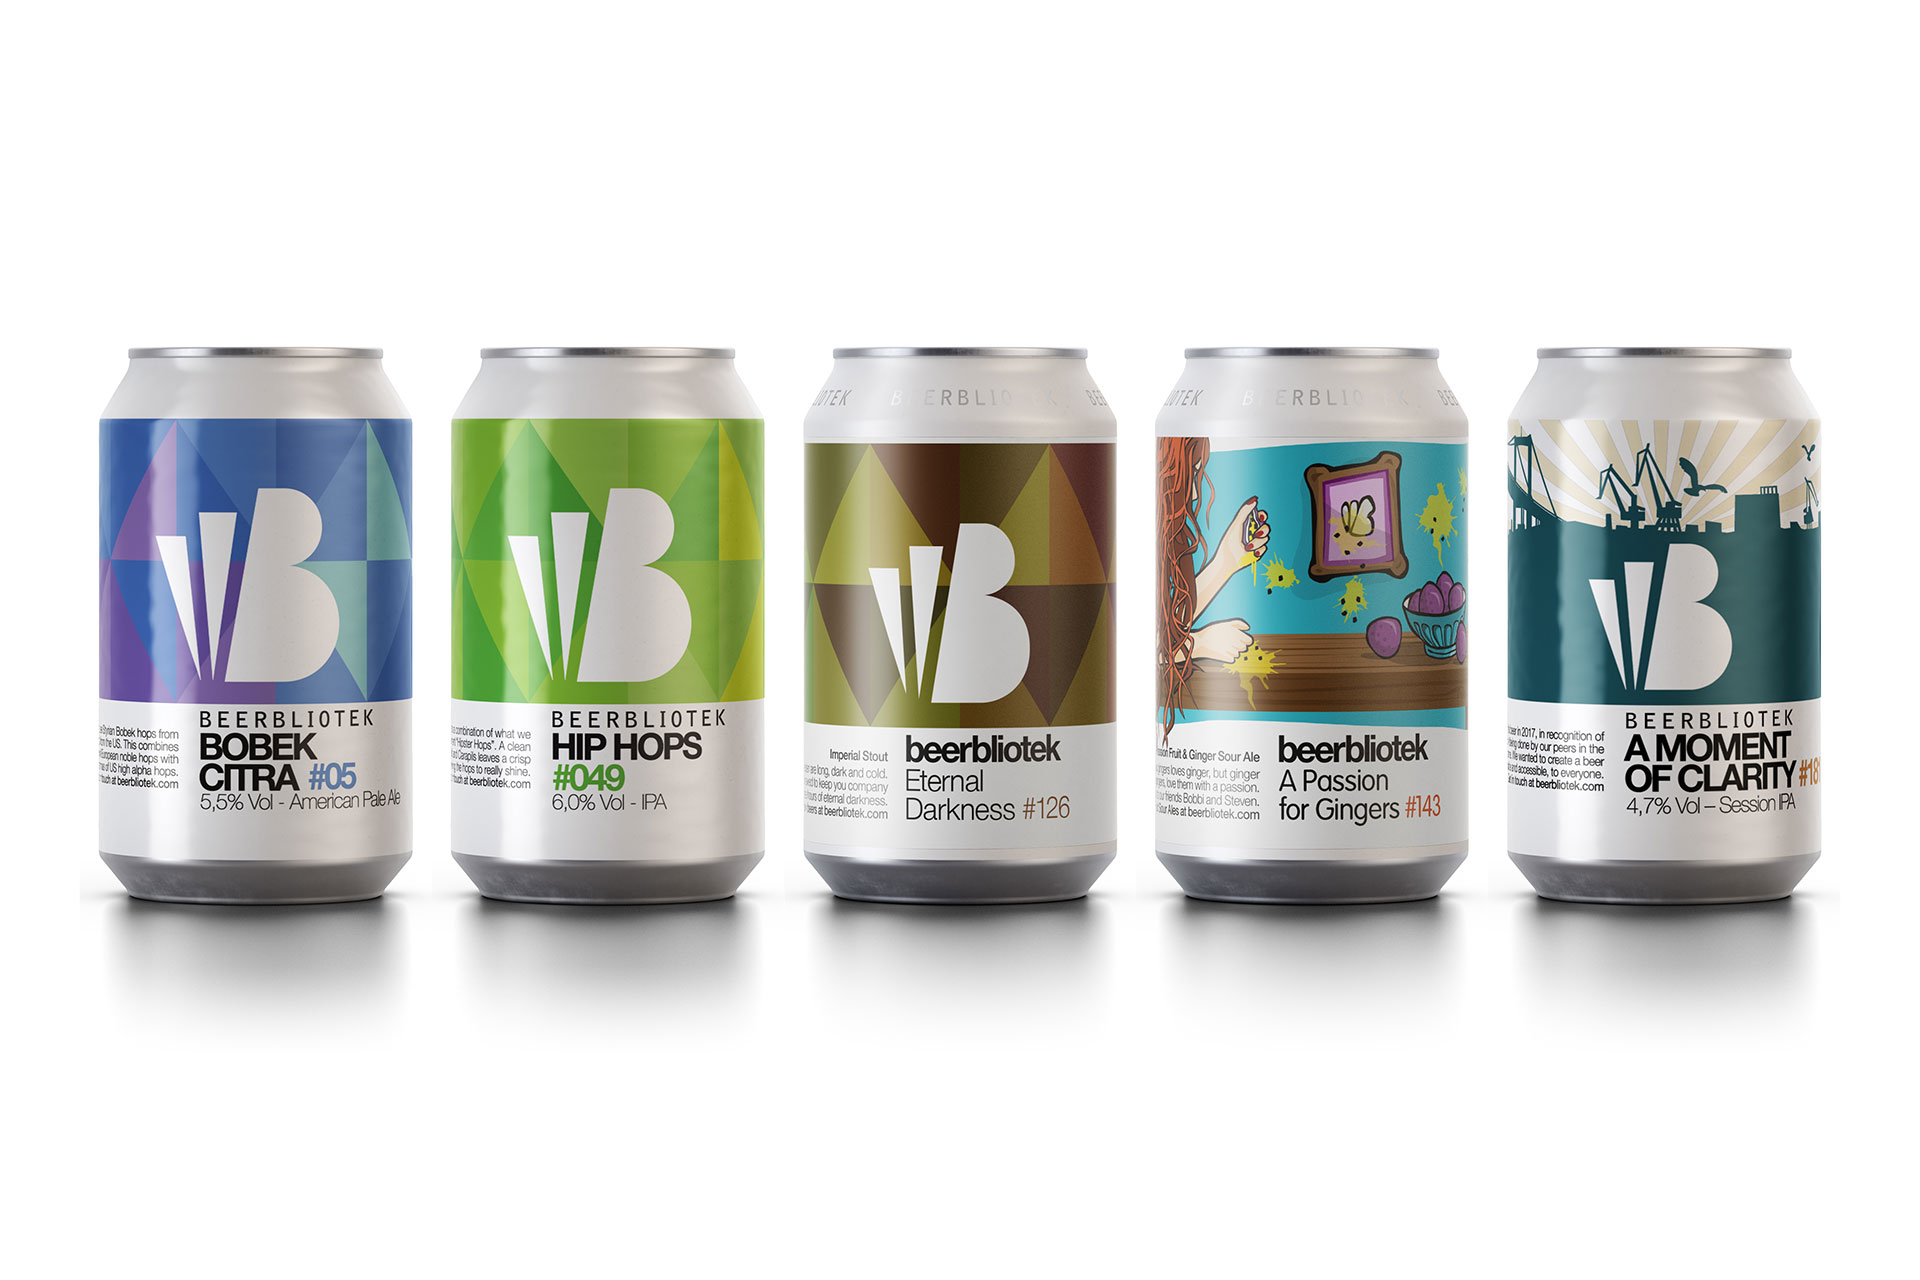 New Packshot of 2019 updated Core Range beers from Craft Brewery, Beerbliotek, Gothenburg, Sweden, featuring beers Bobek Citra, Hip Hops, Eternal Darnkess, A Passion for Gingers and A Moment of Clarity